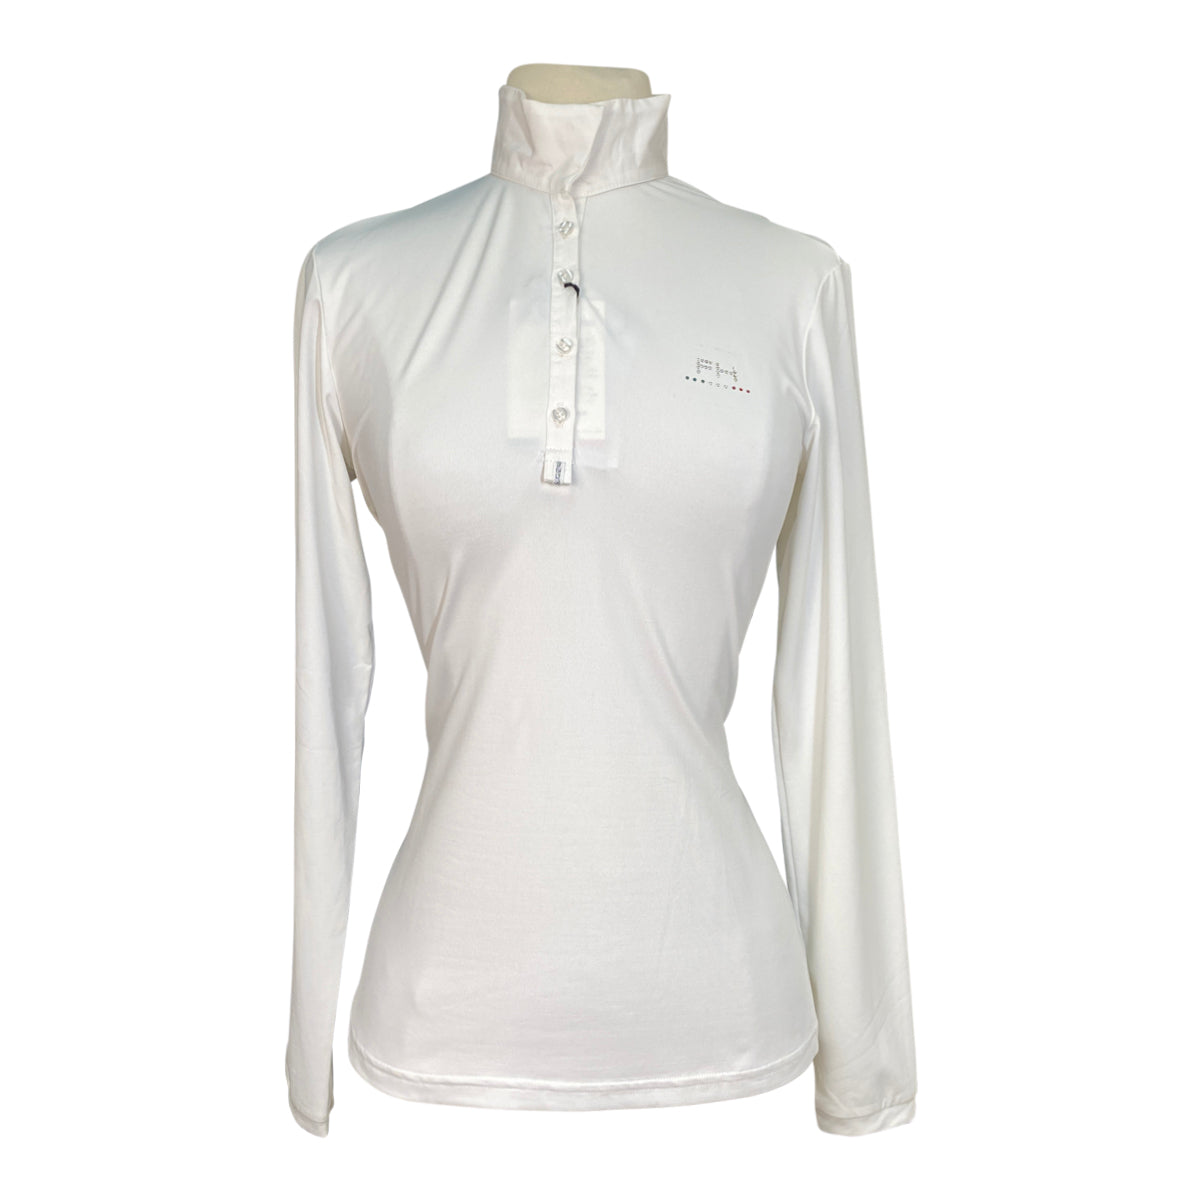 For Horses 'Sirio' Show Shirt in White